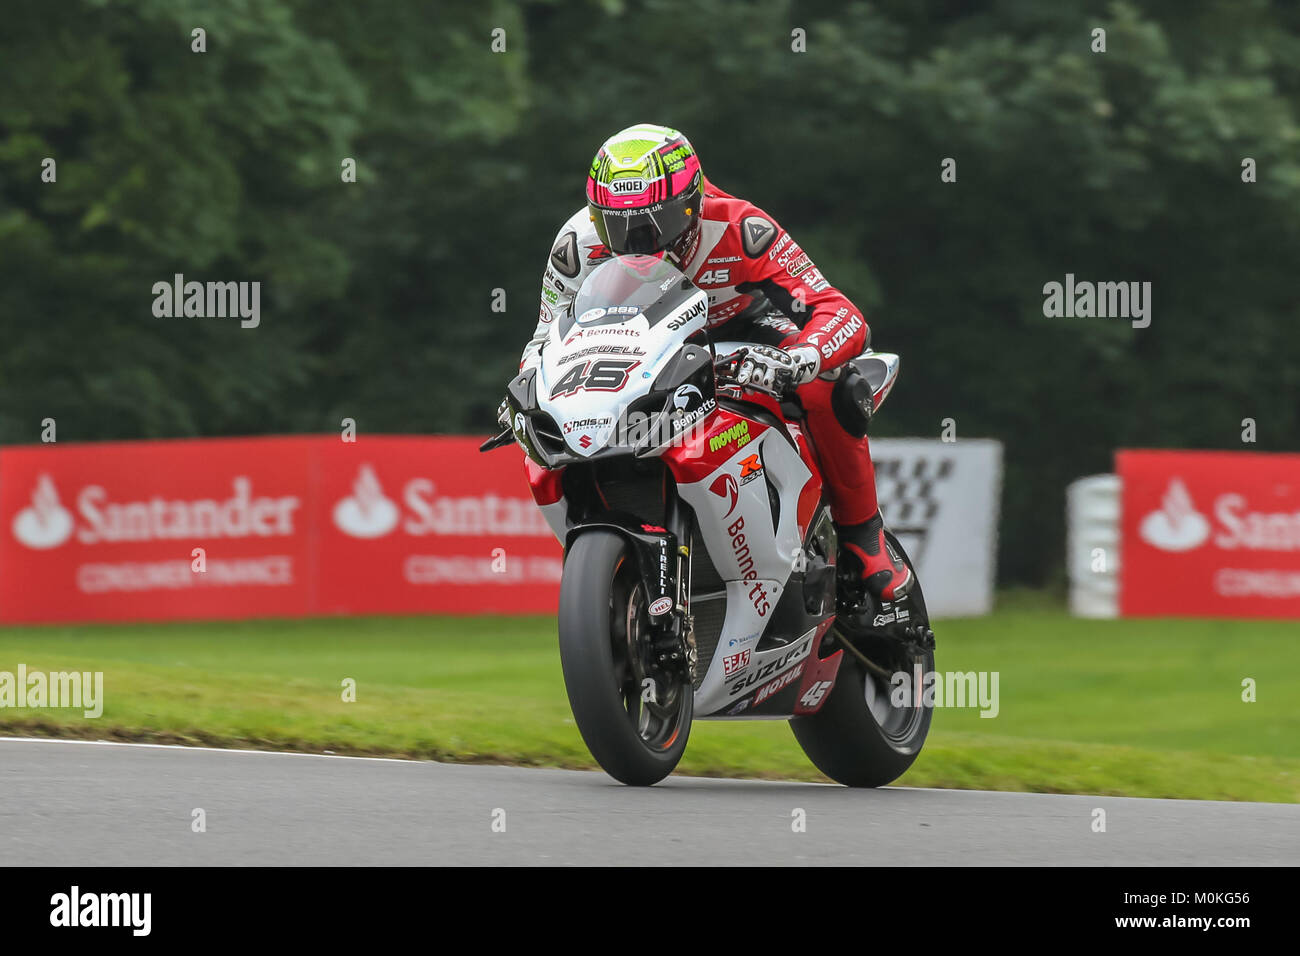 Tommy Bridewell On The Bennetts Suzuki Exciting Hall Bends During The Bsb Meeting At Cadwell